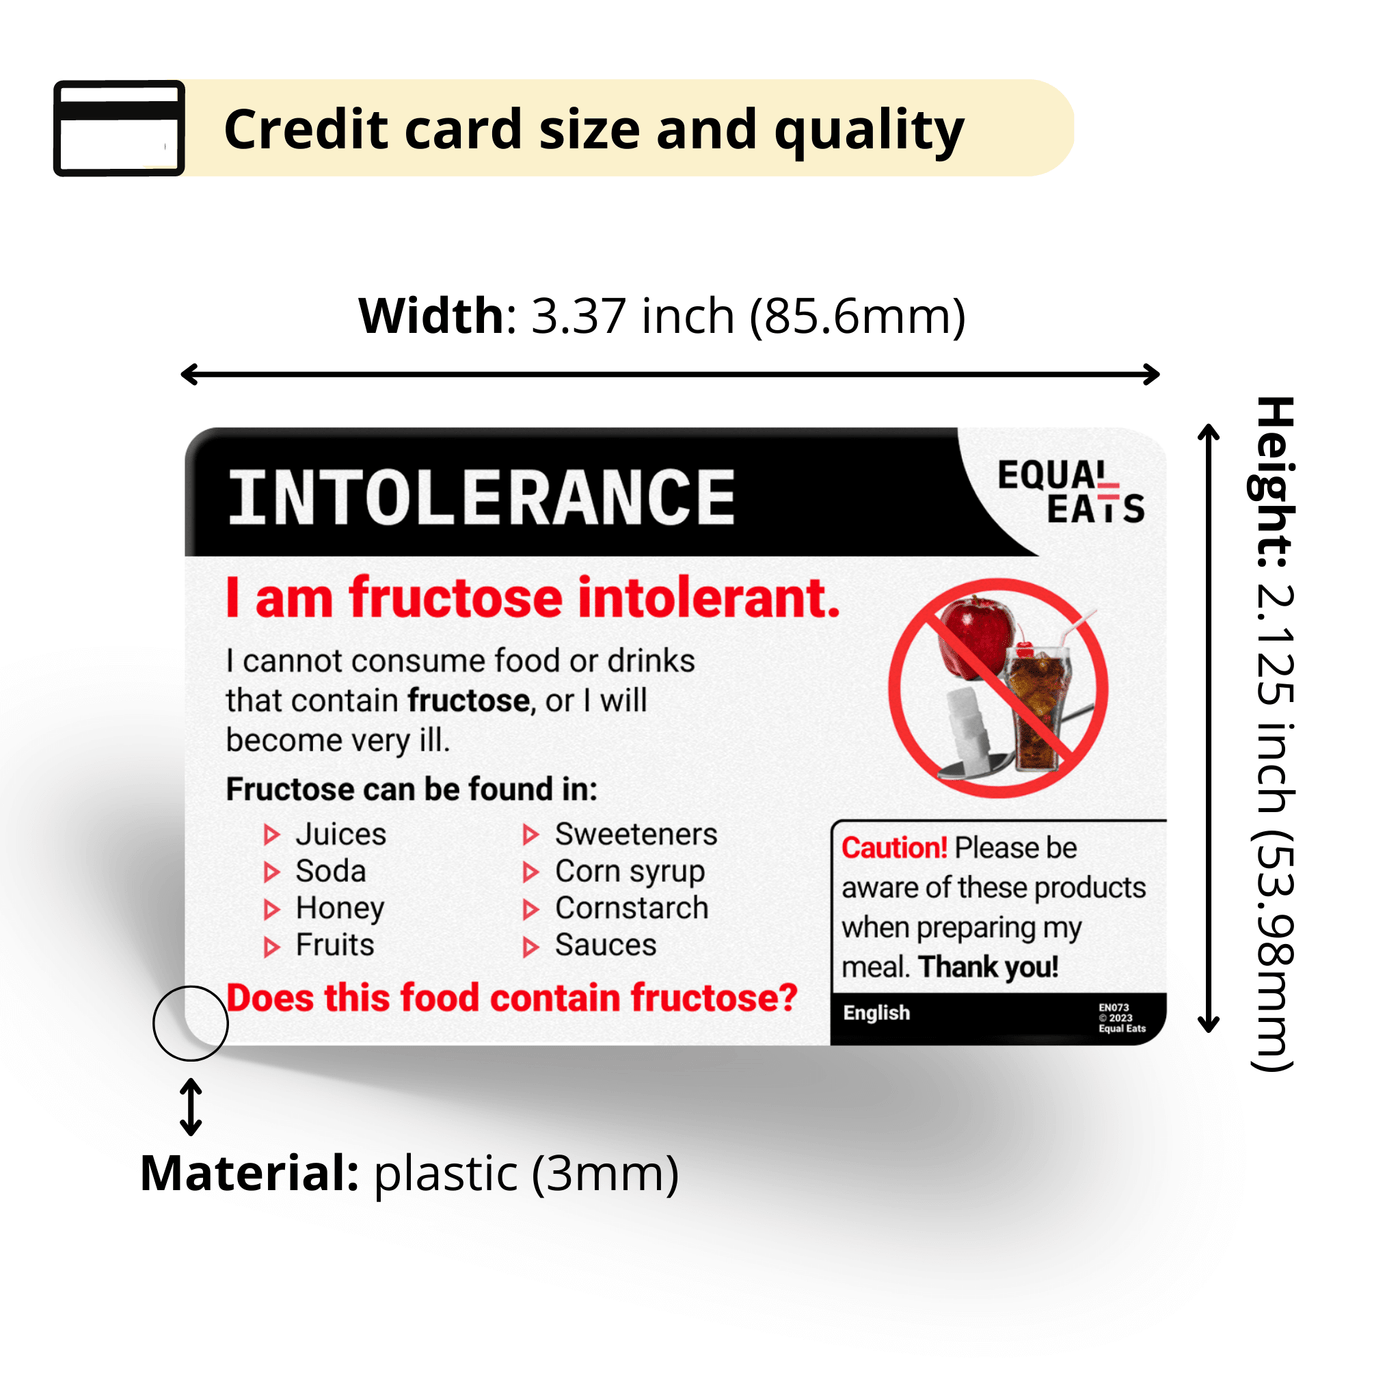 Lithuanian Fructose Intolerance Card